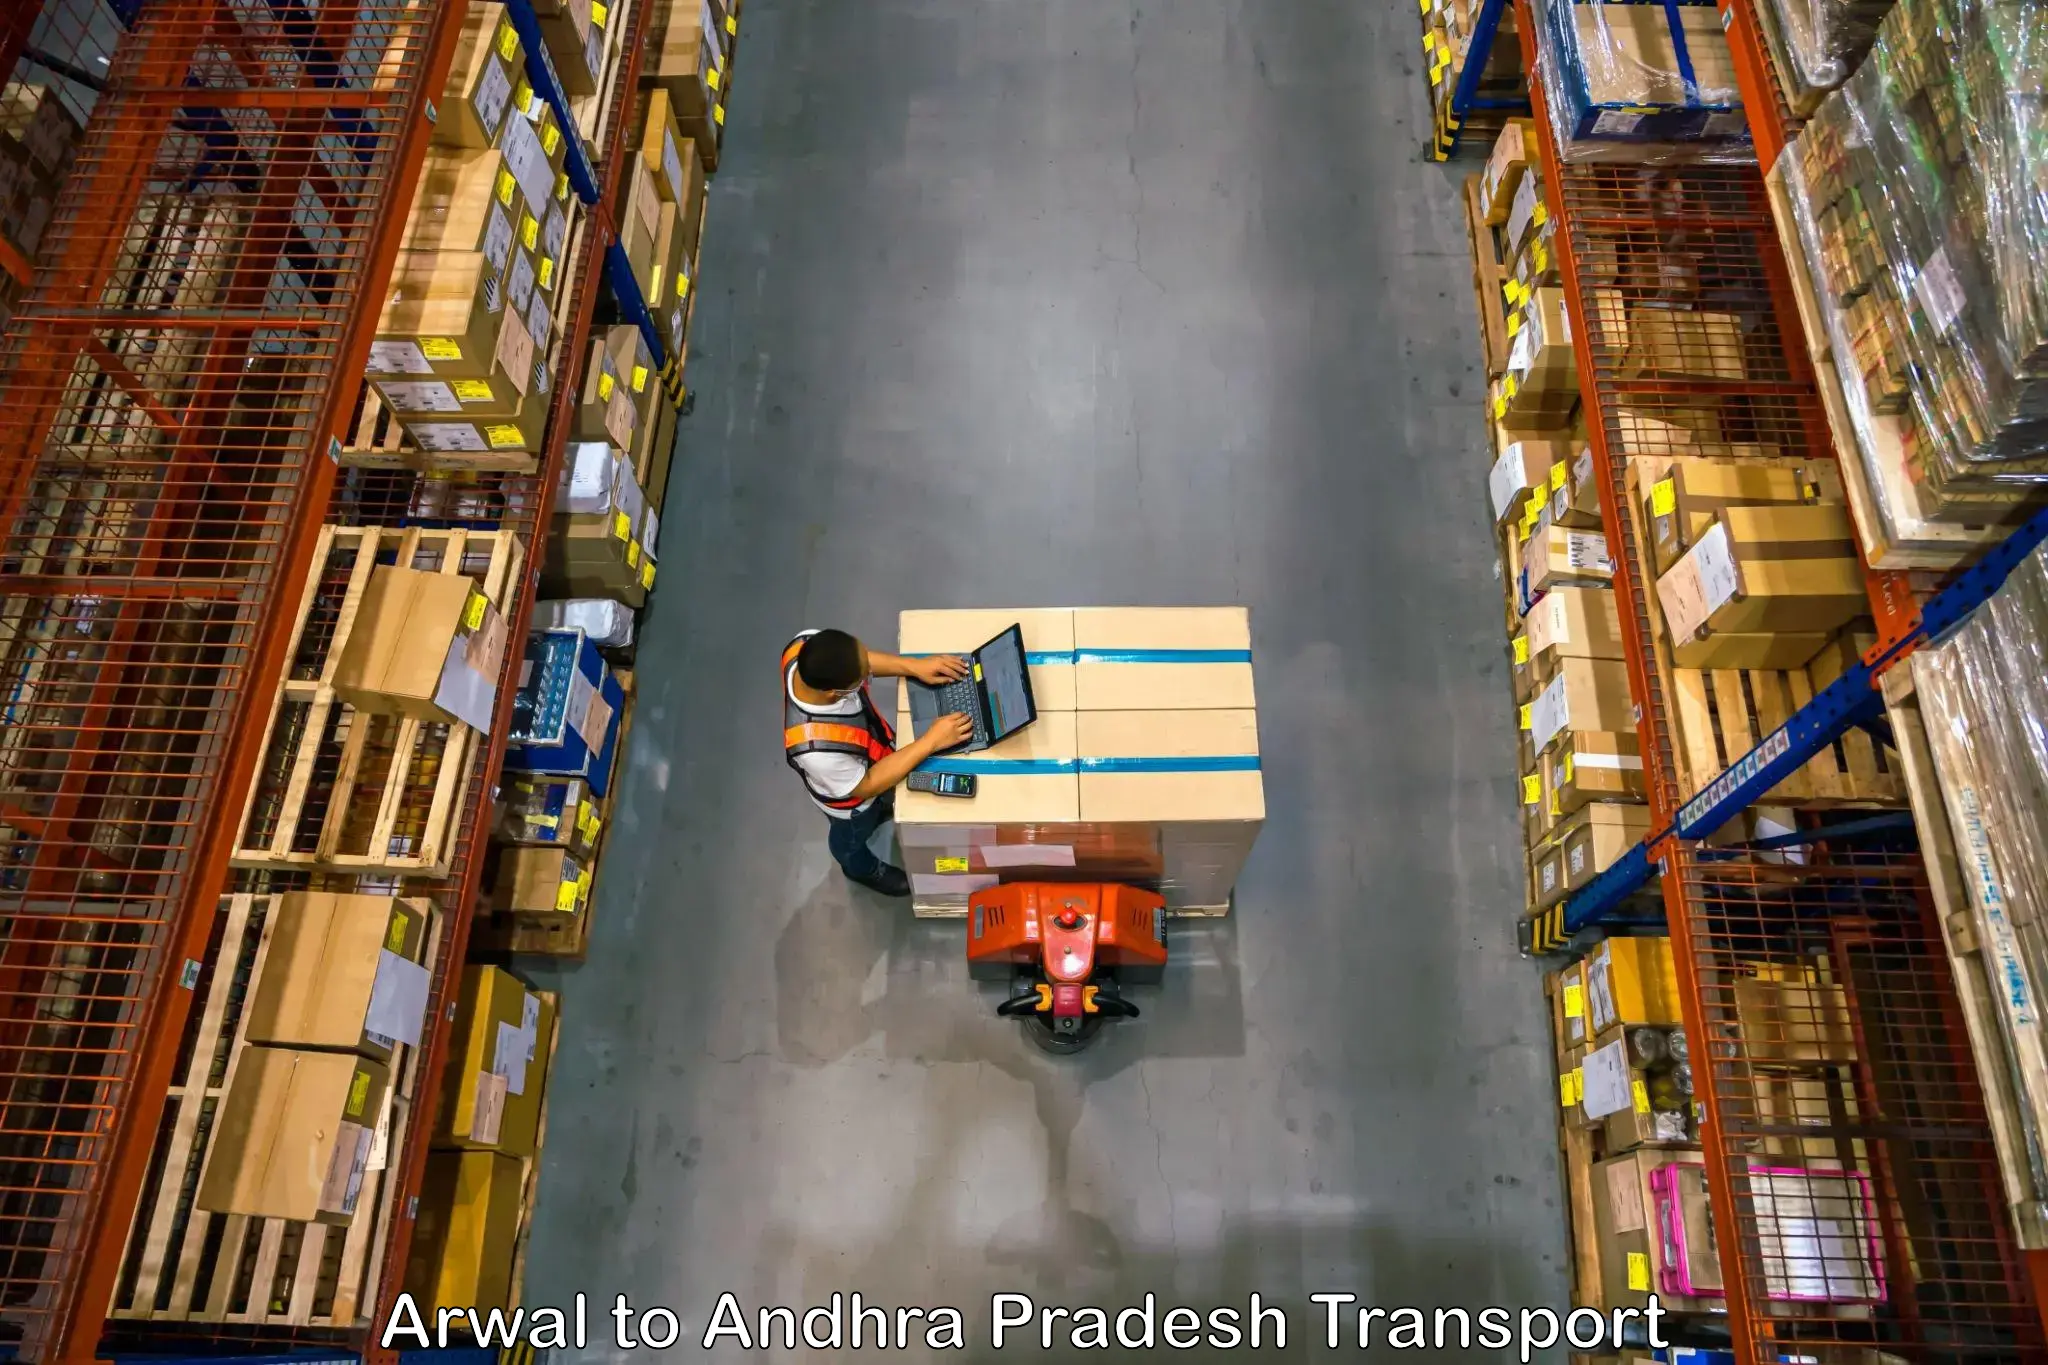 Air freight transport services Arwal to Visakhapatnam Port